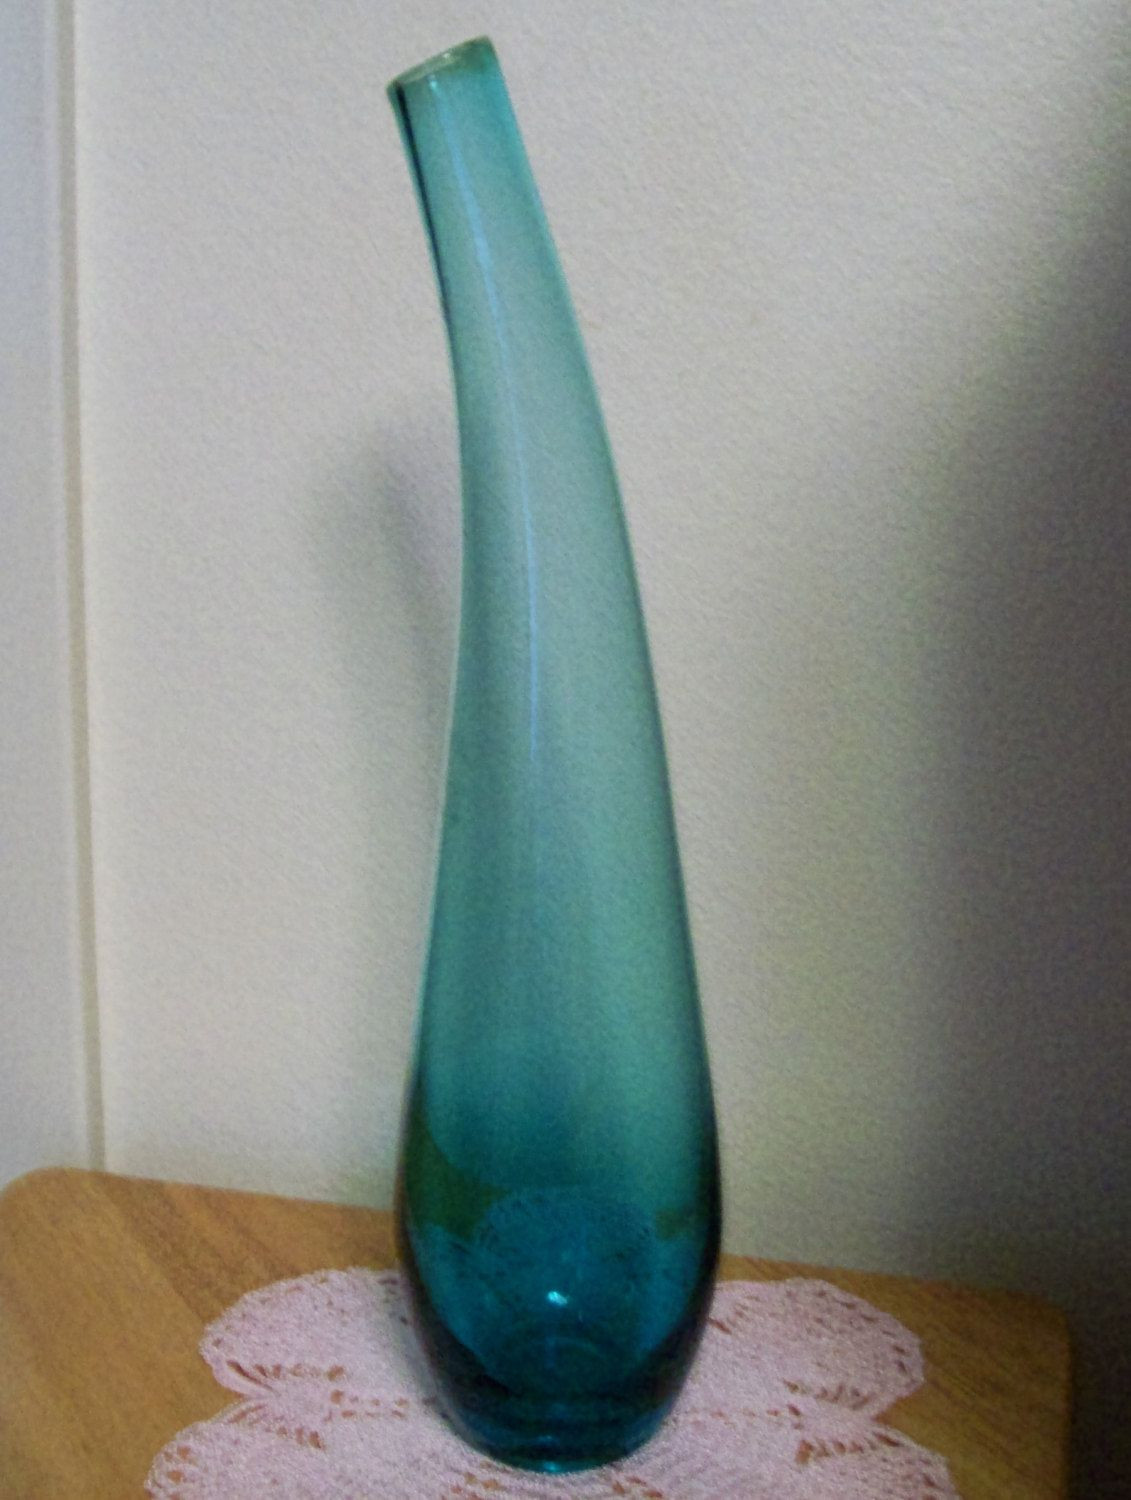 tall teal glass vase of vintage blown art glass turquoise bottle vase 13 inches tall great with regard to vintage blown art glass turquoise bottle vase 13 inches tall great piece for south western living room bedroom or bathroom decor